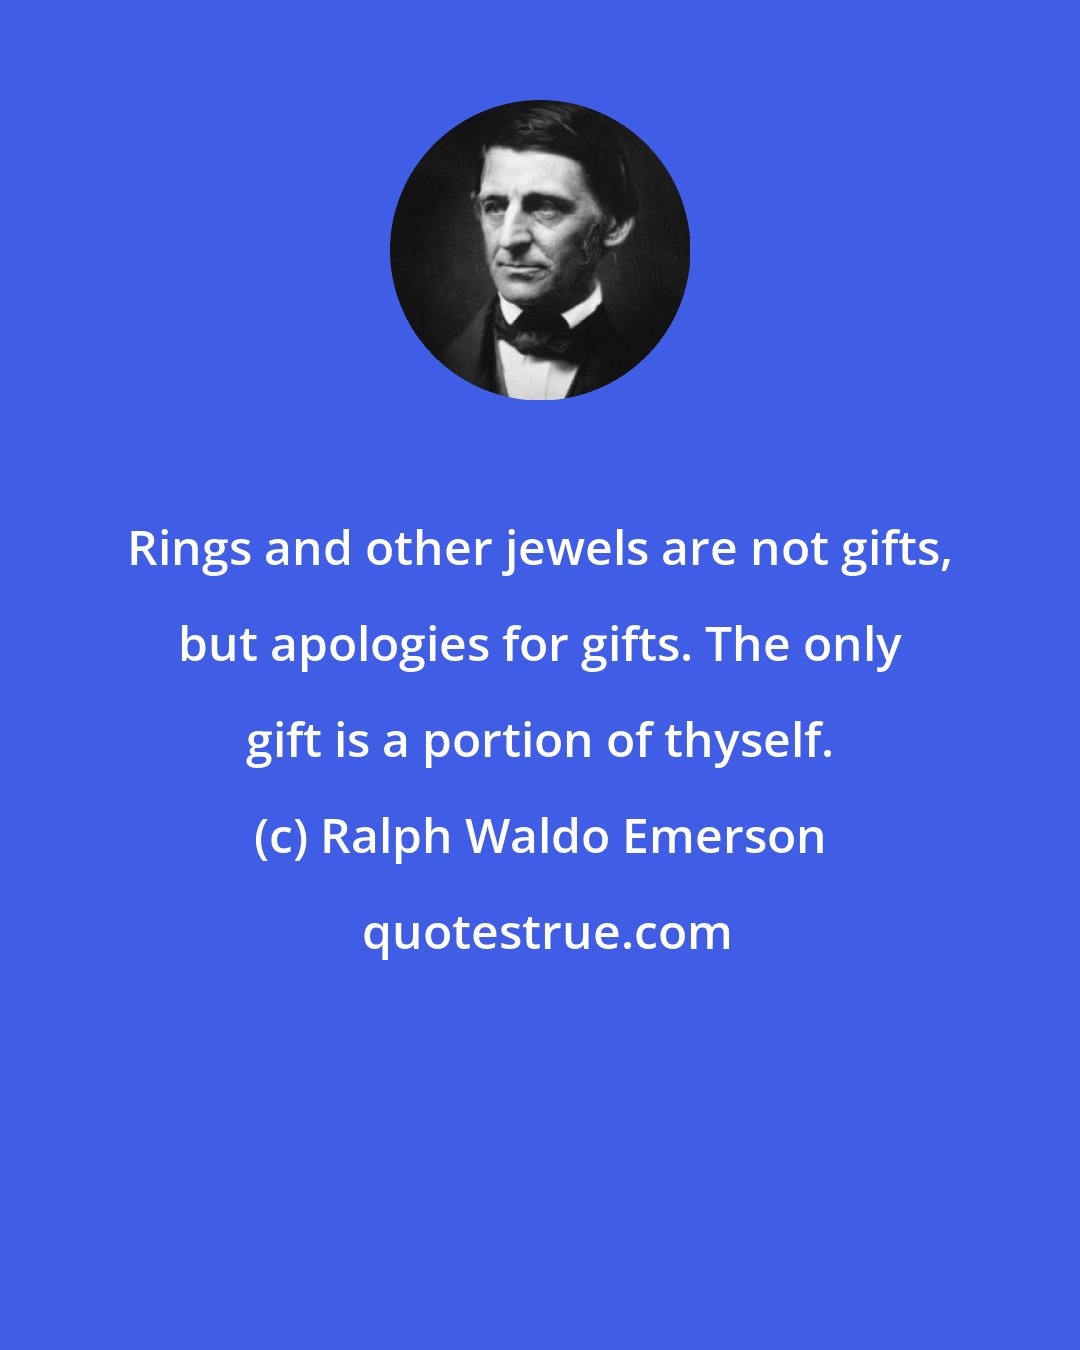 Ralph Waldo Emerson: Rings and other jewels are not gifts, but apologies for gifts. The only gift is a portion of thyself.